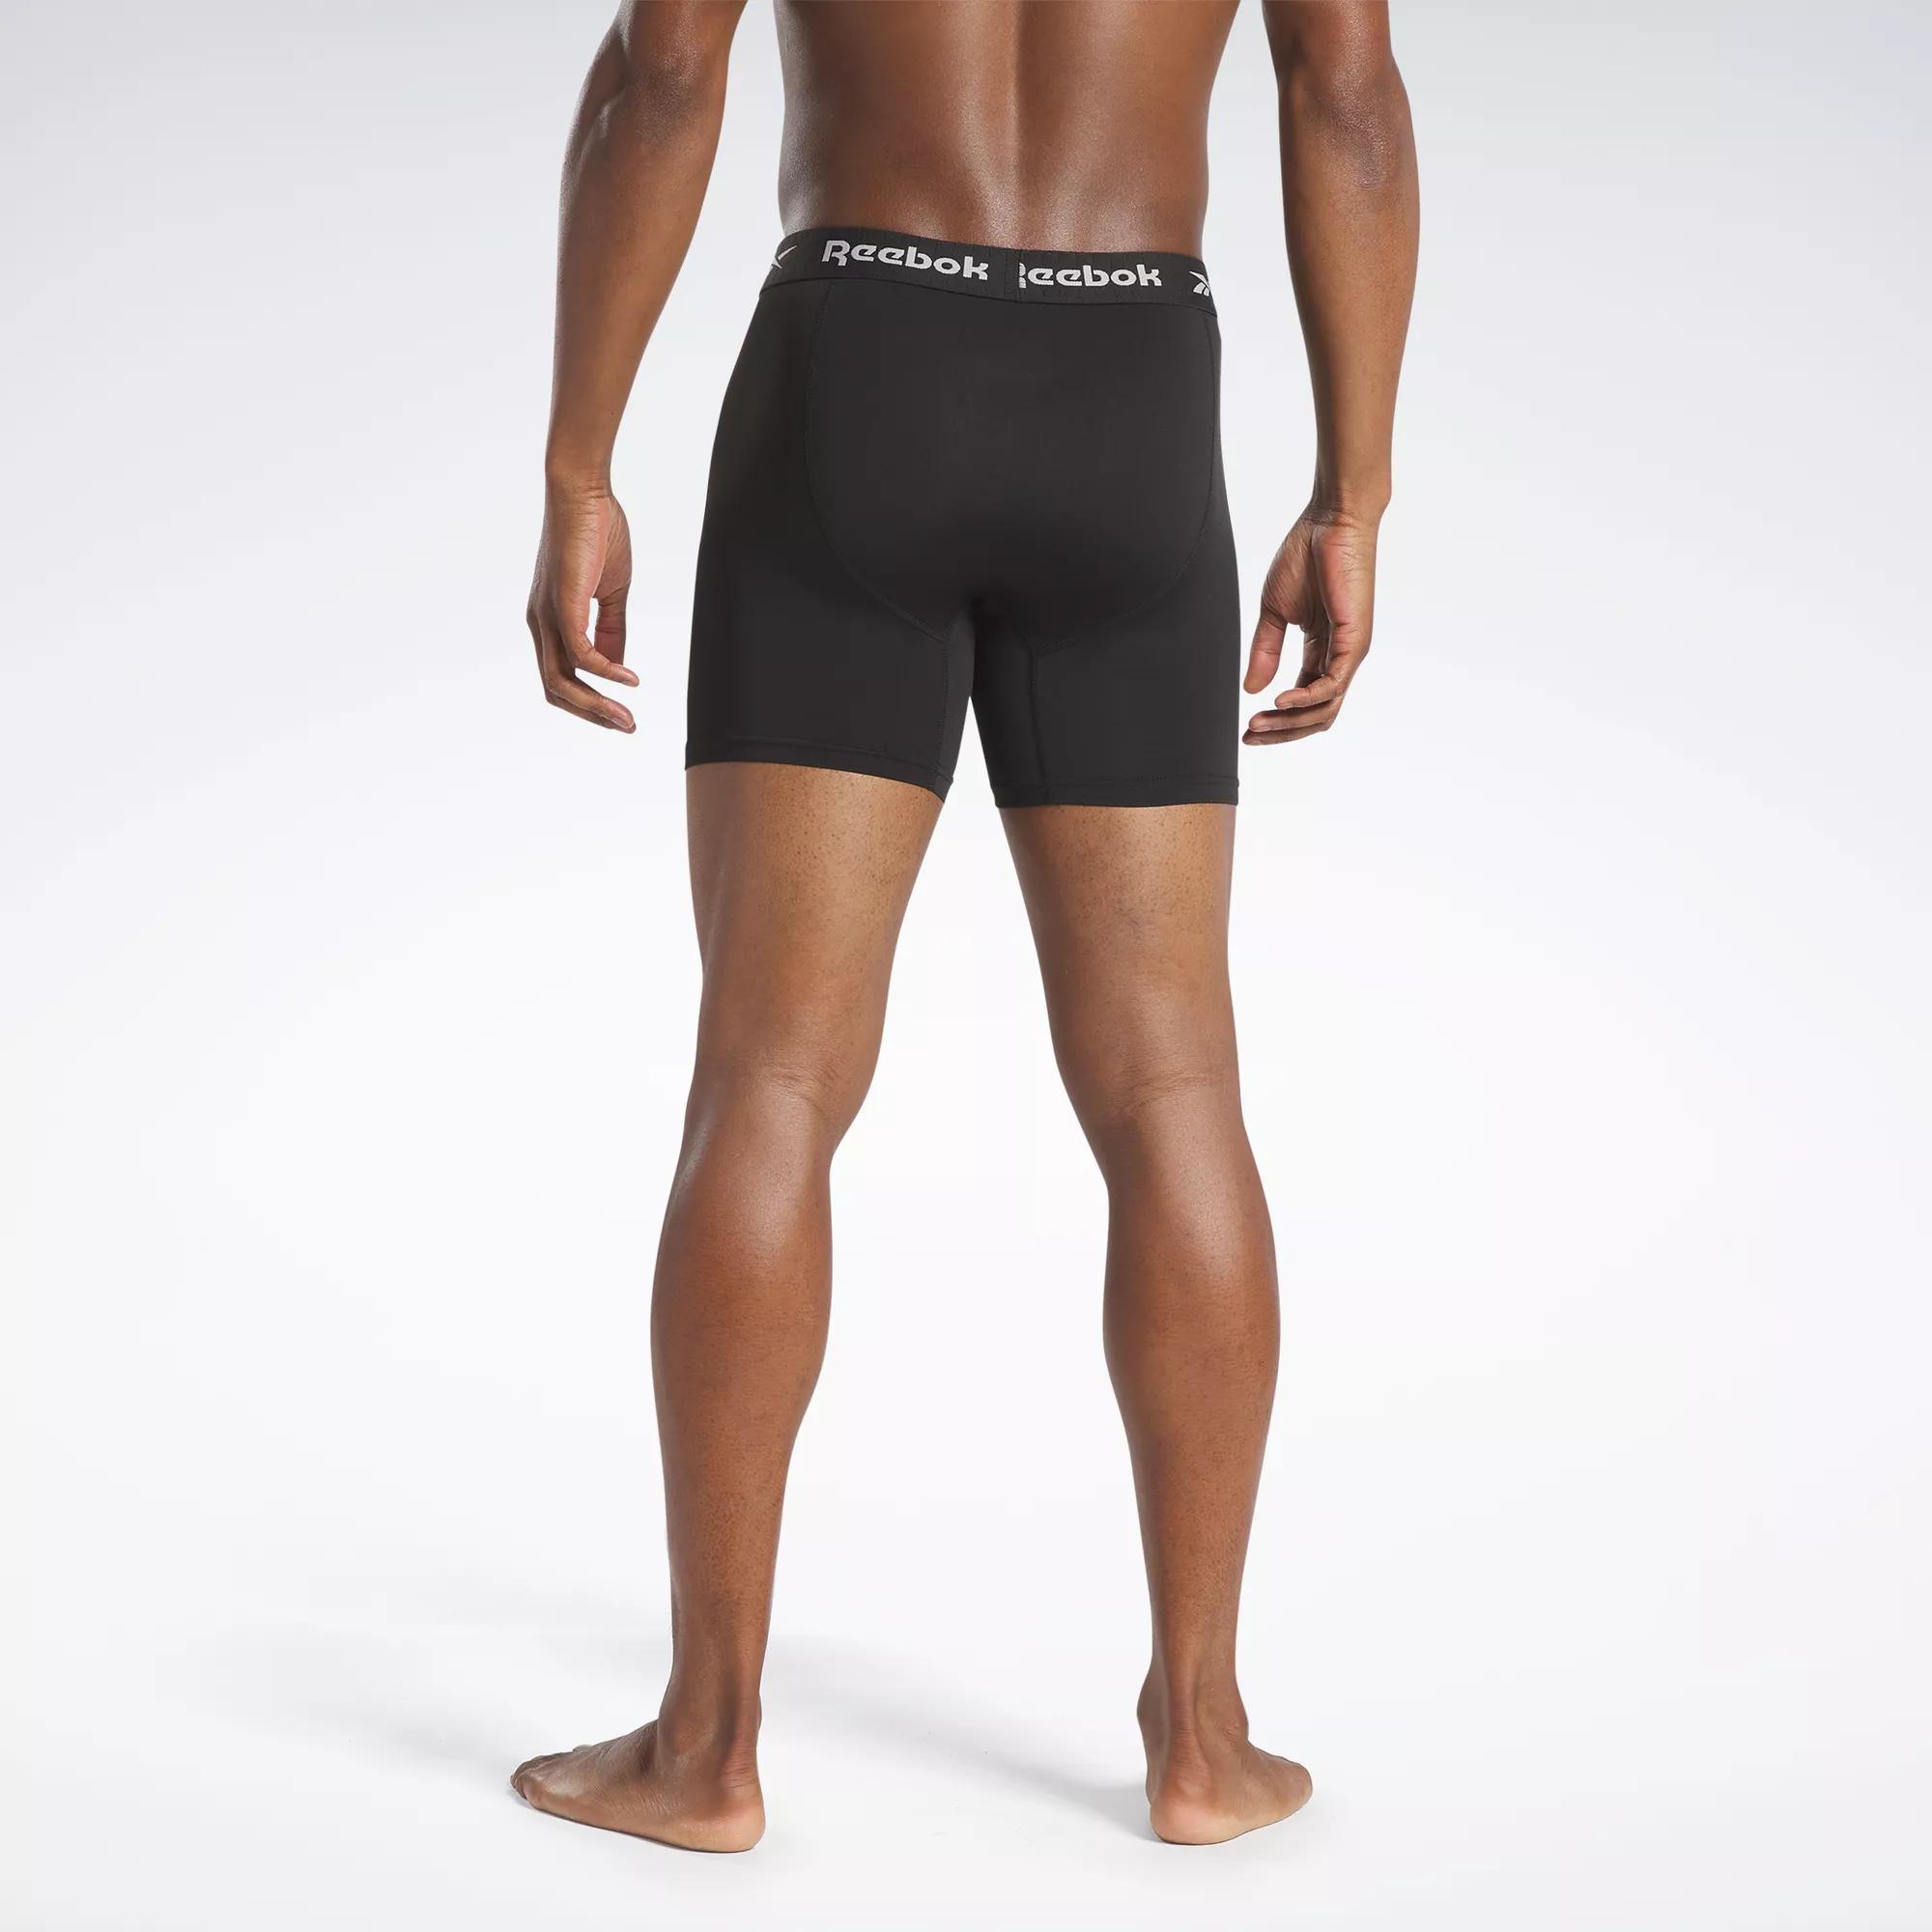 Reebok Men's 4 Pack Performance Boxer Briefs with Comfort Pouch (Medium,  India Ink/Chocolate Truffle/Monument/Black) price in UAE,  UAE